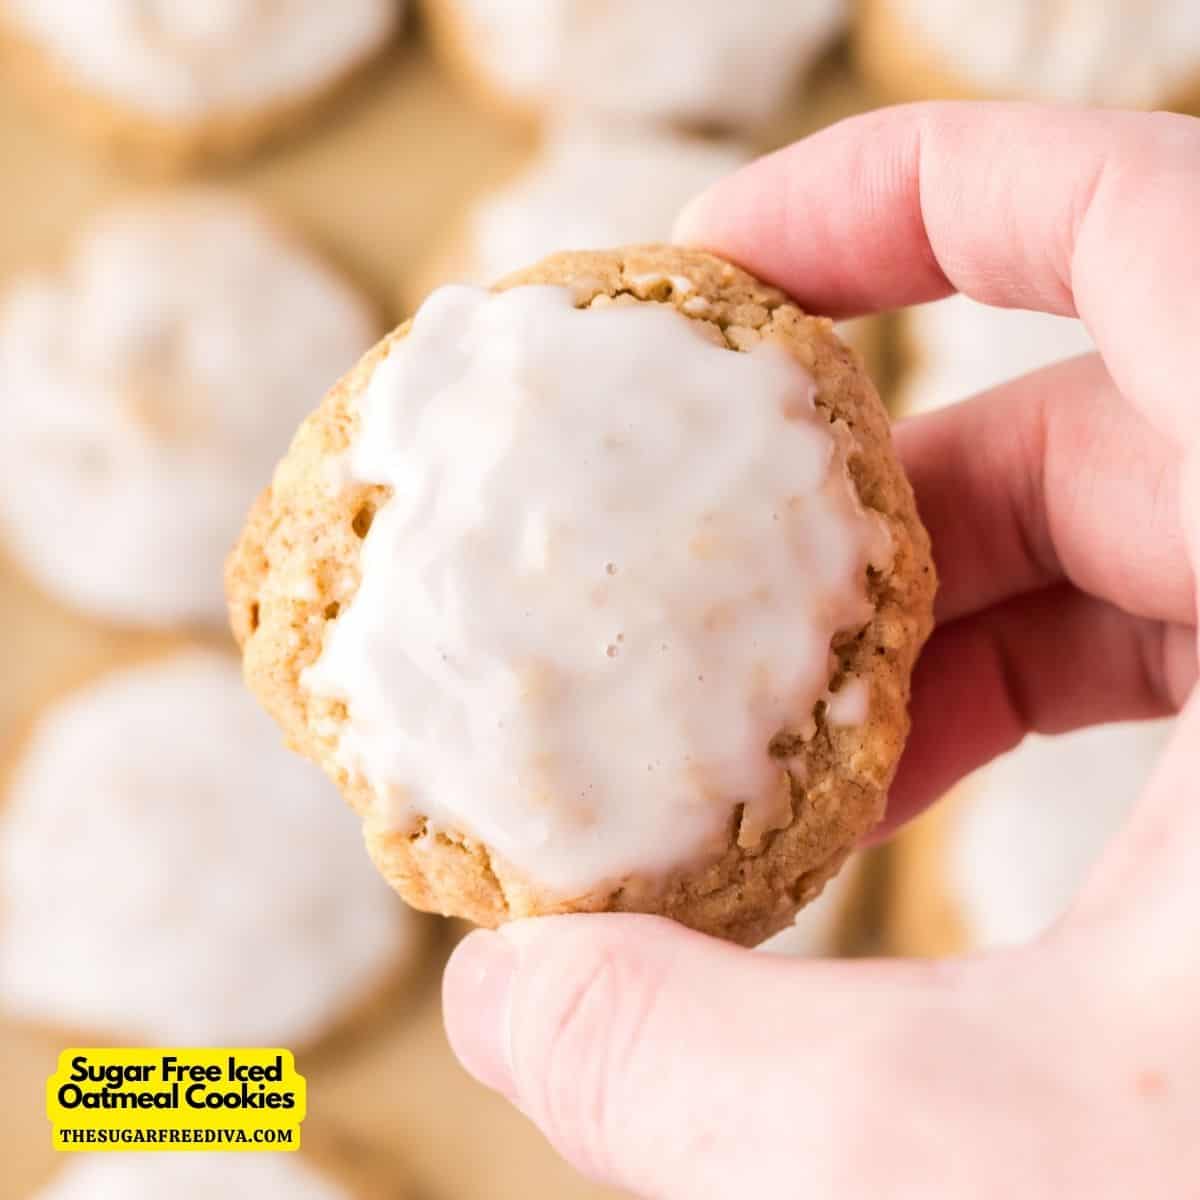 Sugar Free Iced Oatmeal Cookies, a simple and delicious dessert recipe made with oats and no added sugar. Topped with a glaze. No added sugar